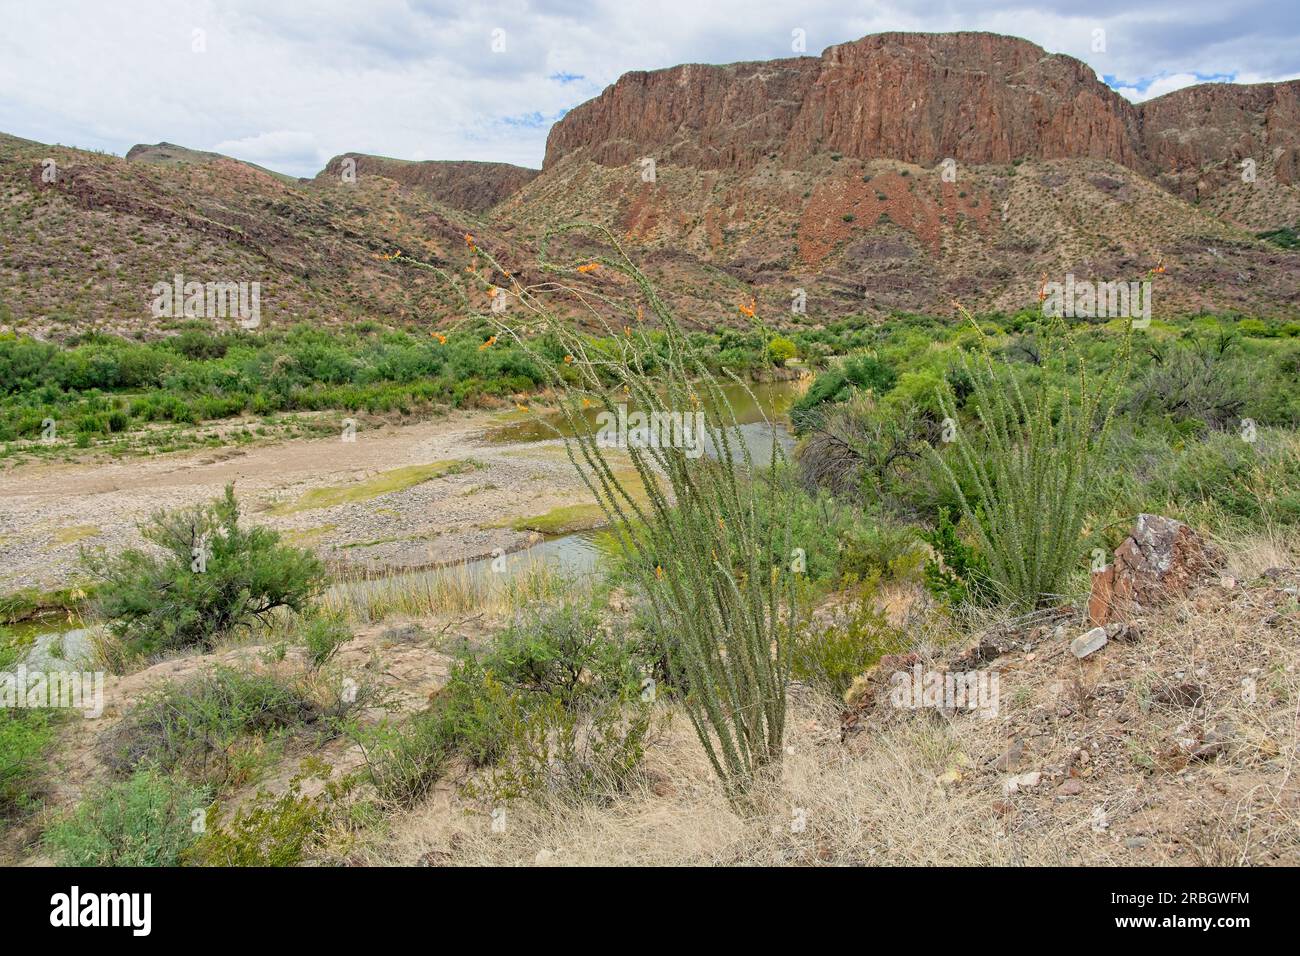 Ocotillo cactus stand in bloom on banks of meandering Rio Grande river in springtime Stock Photo